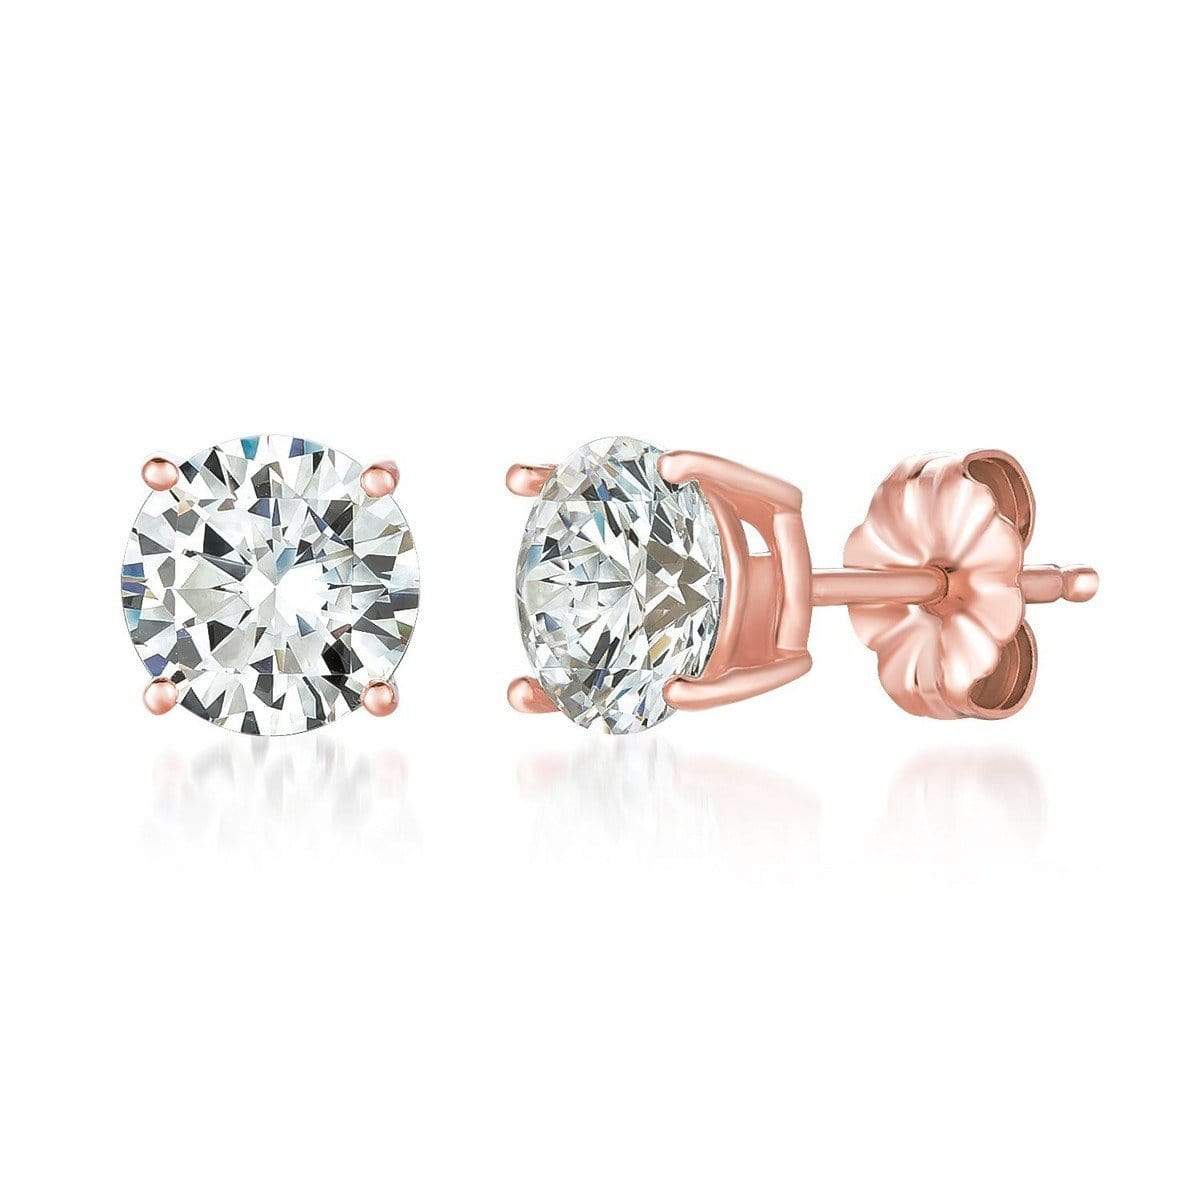 CRISLU Solitaire Brilliant Earrings 3.00 Carat Finished in 18KT Rose G ...